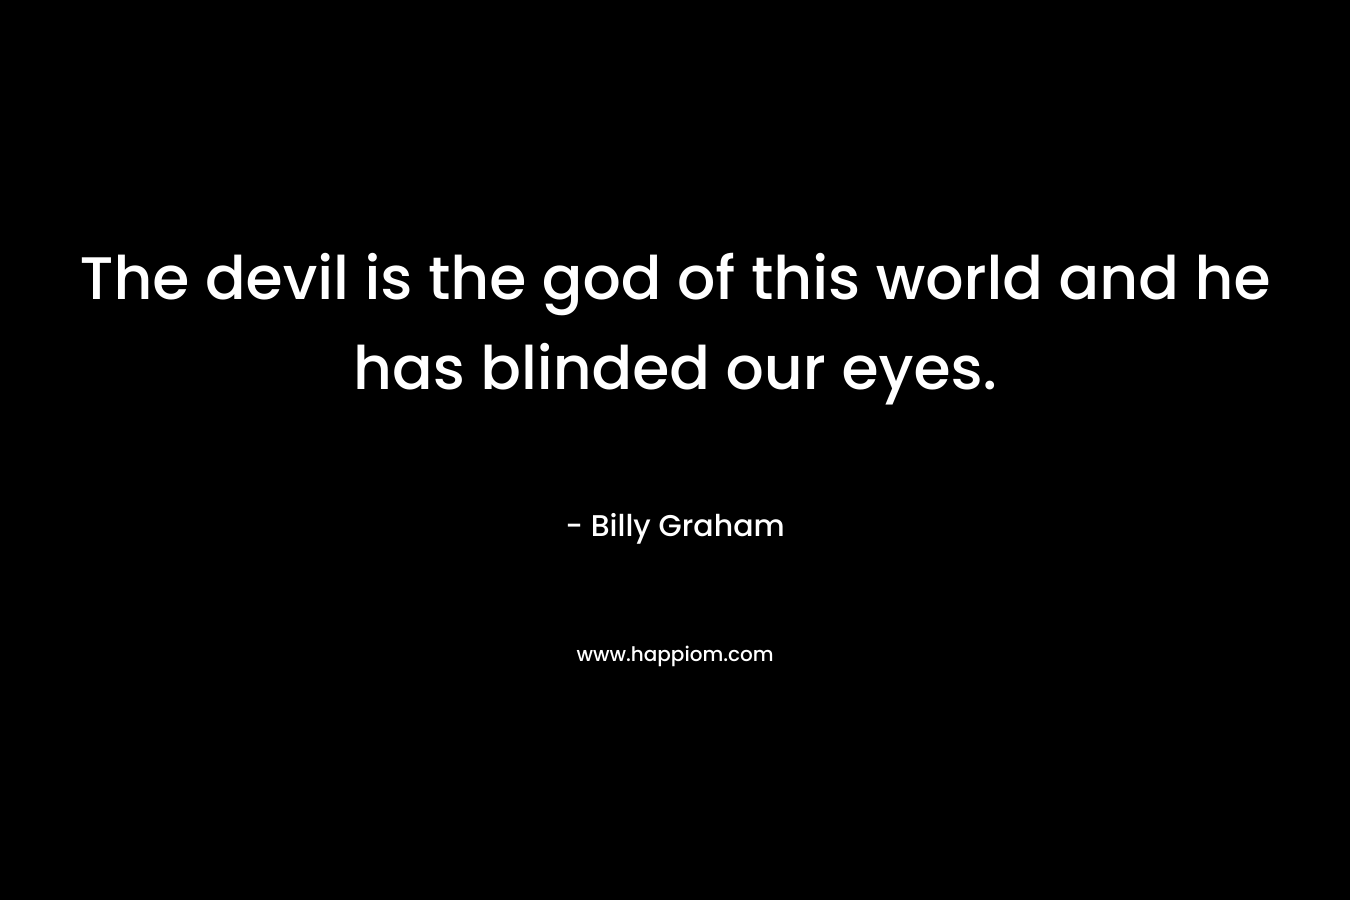 The devil is the god of this world and he has blinded our eyes. – Billy Graham